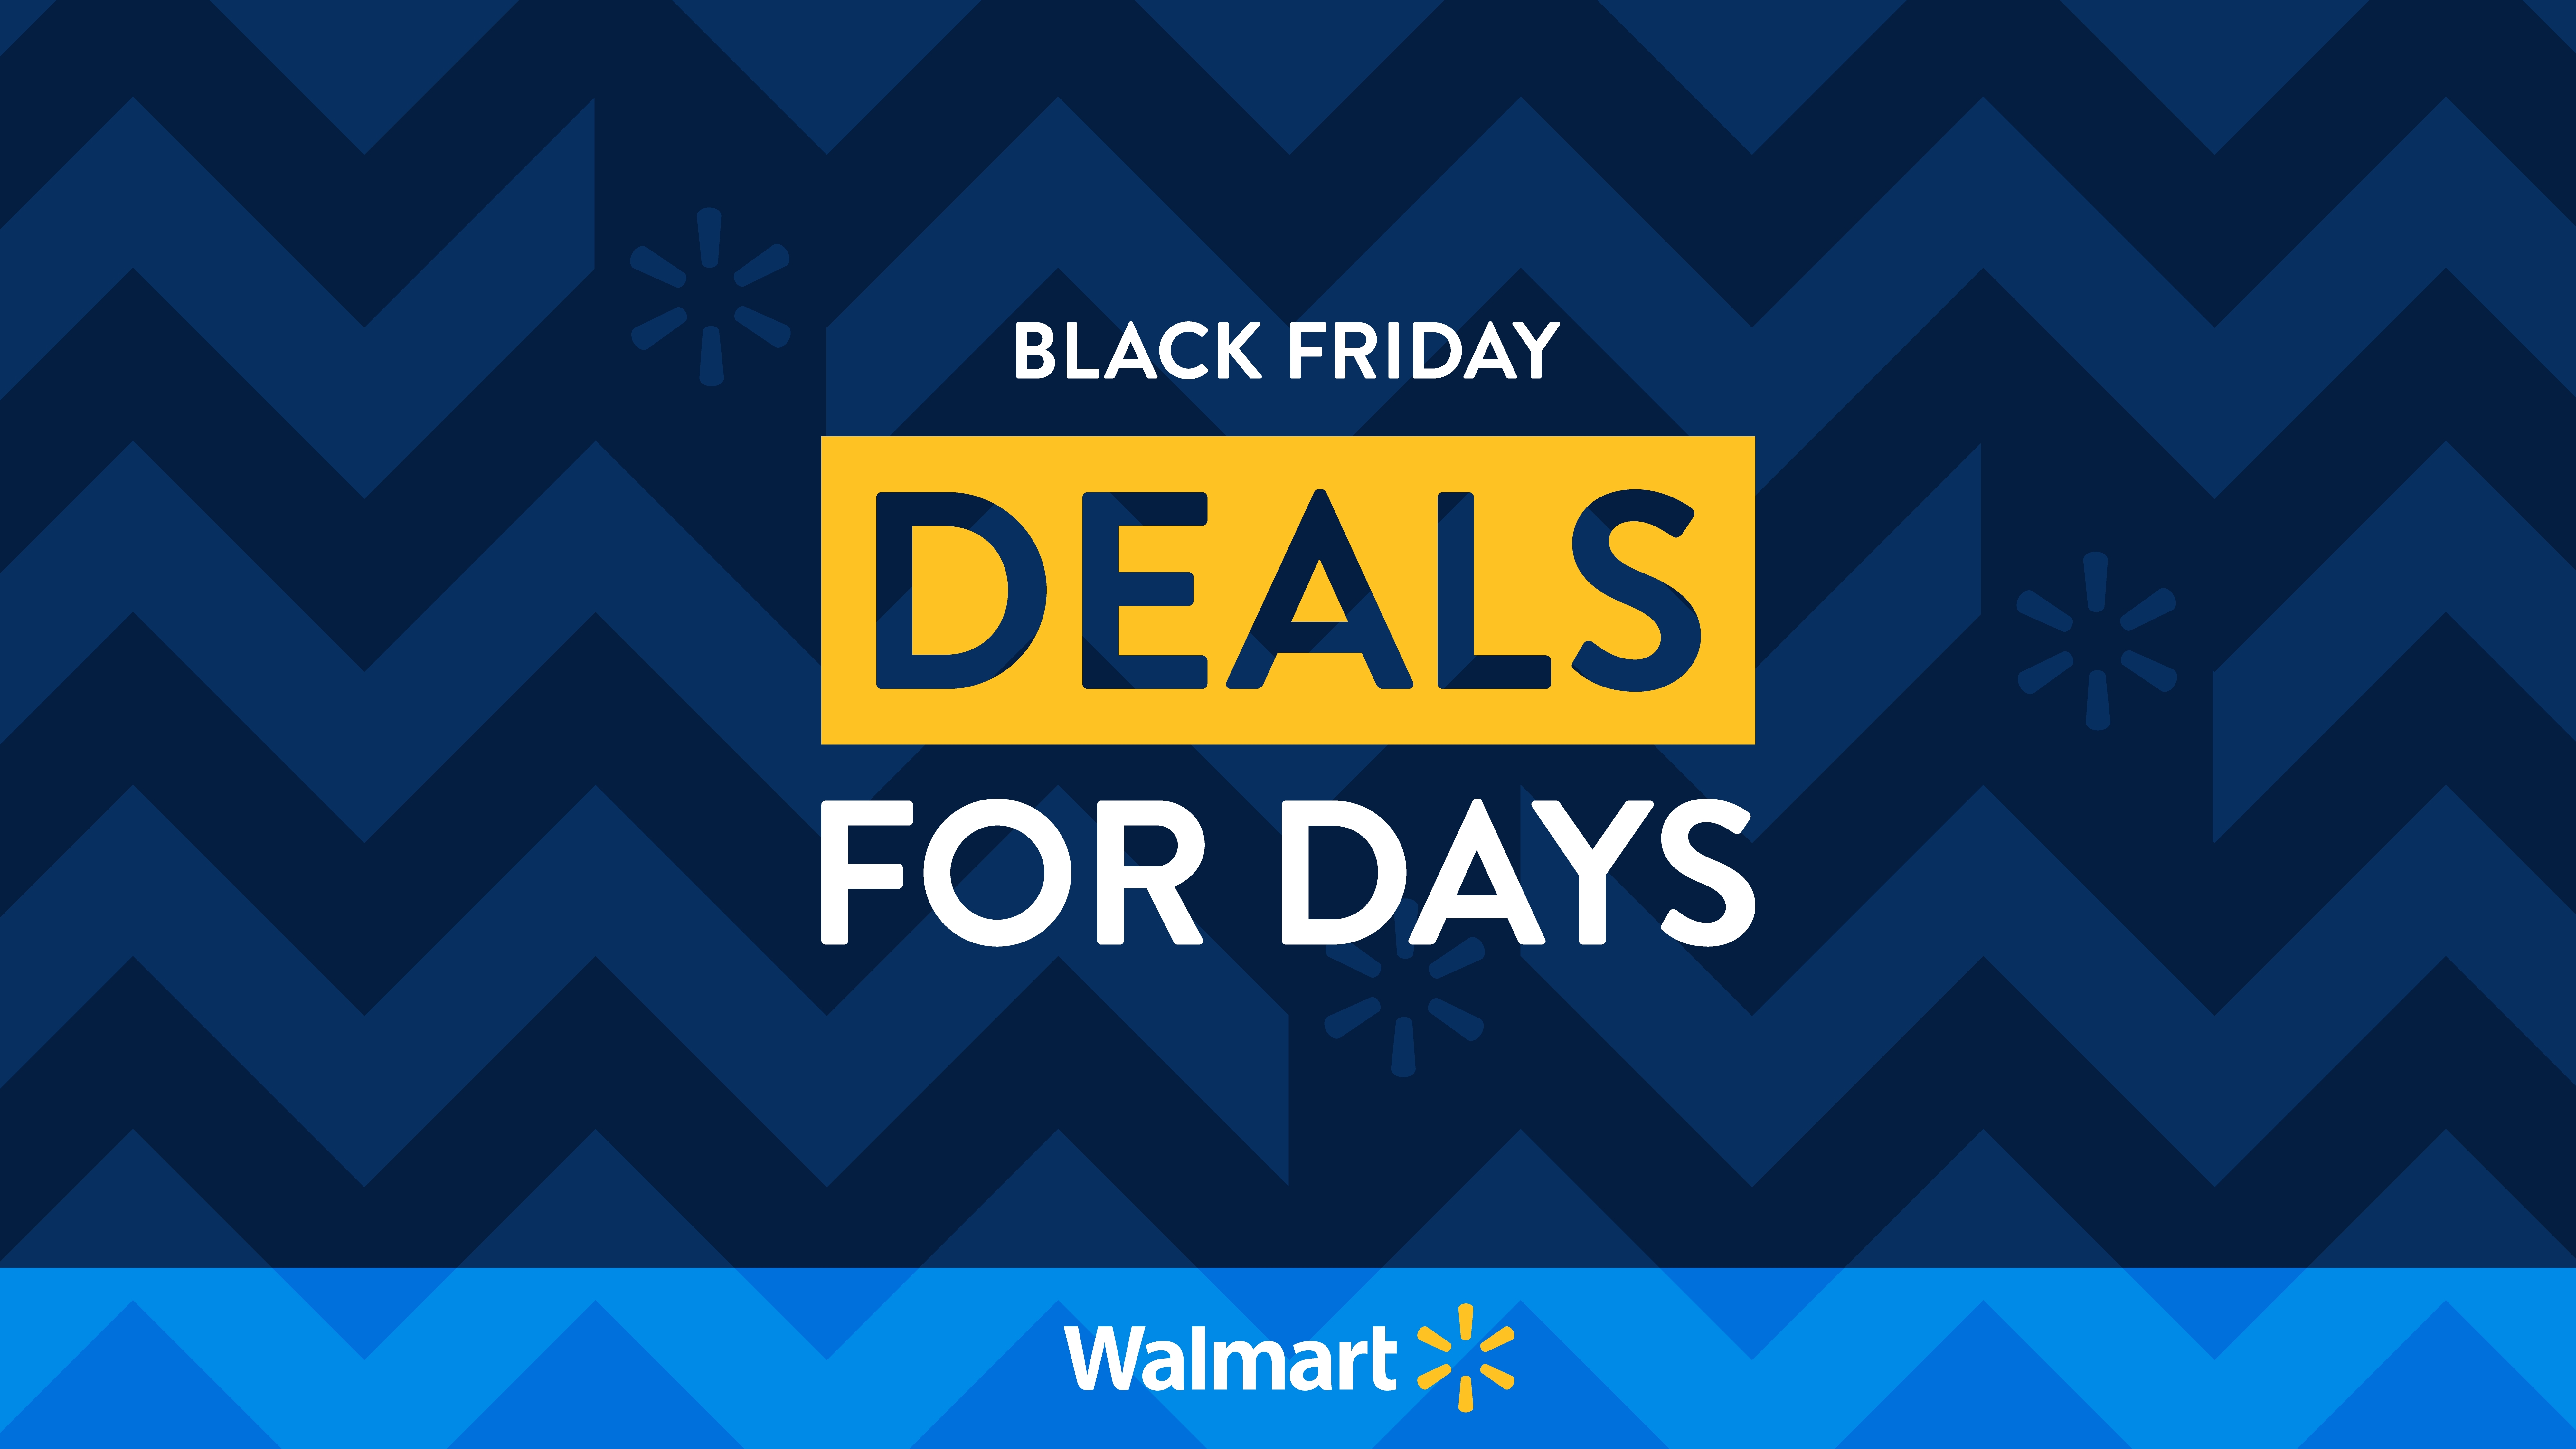 Walmart Announces Black Friday Deals For Days A Reinvented Black Friday Shopping Experience Business Wire